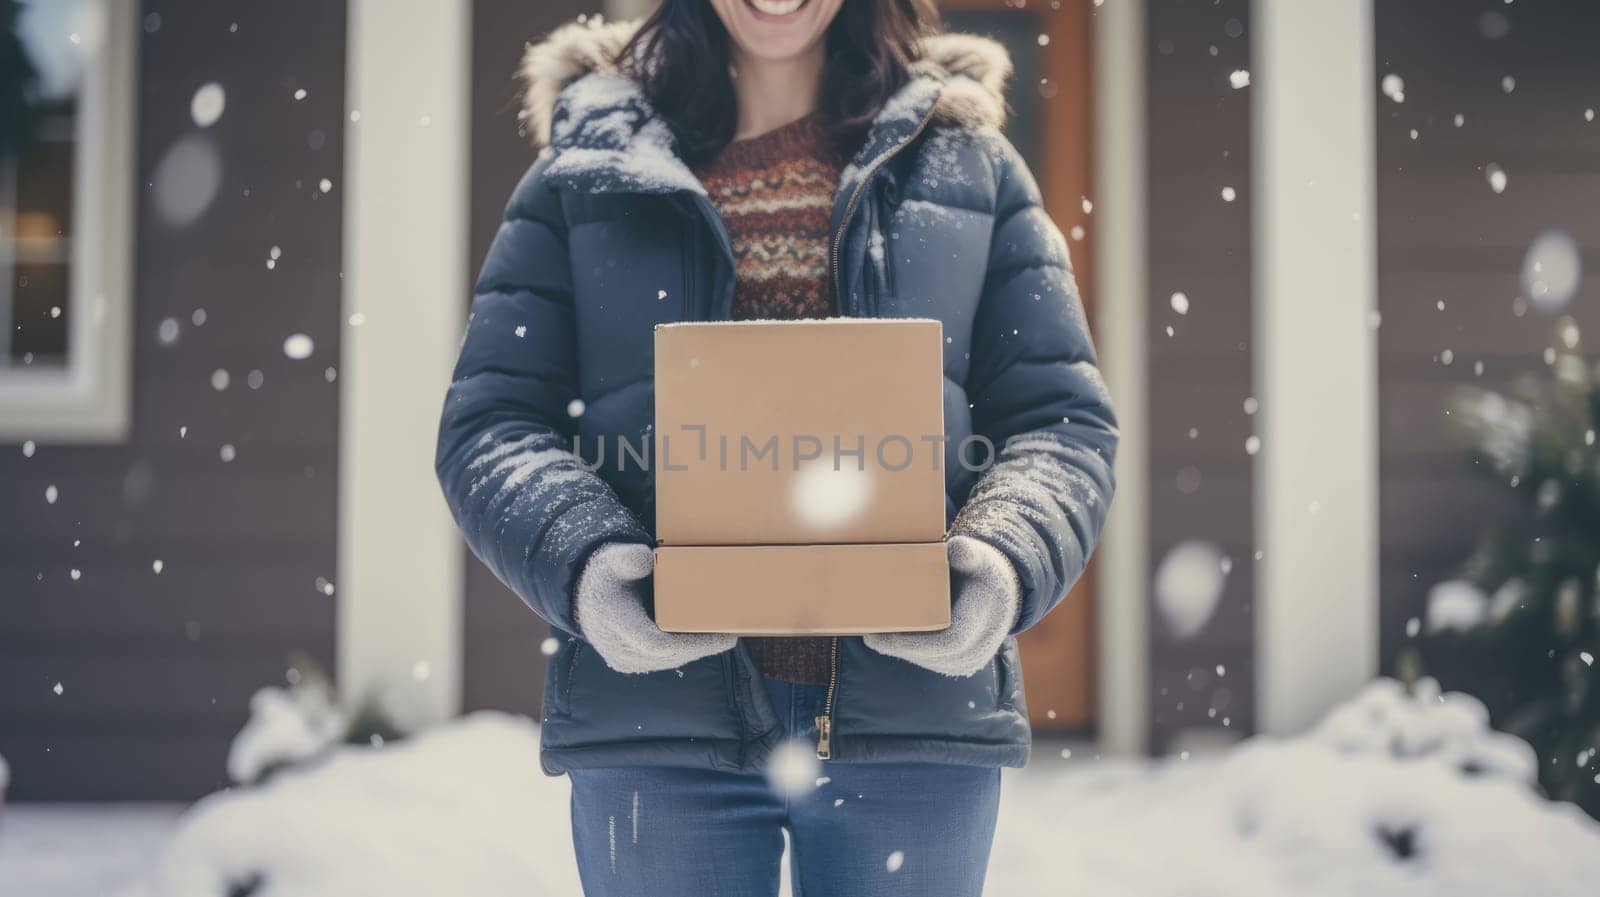 Smiling woman holding parcel box next to front door house entrance. Christmas holidays delivery. Black Friday Online shopping